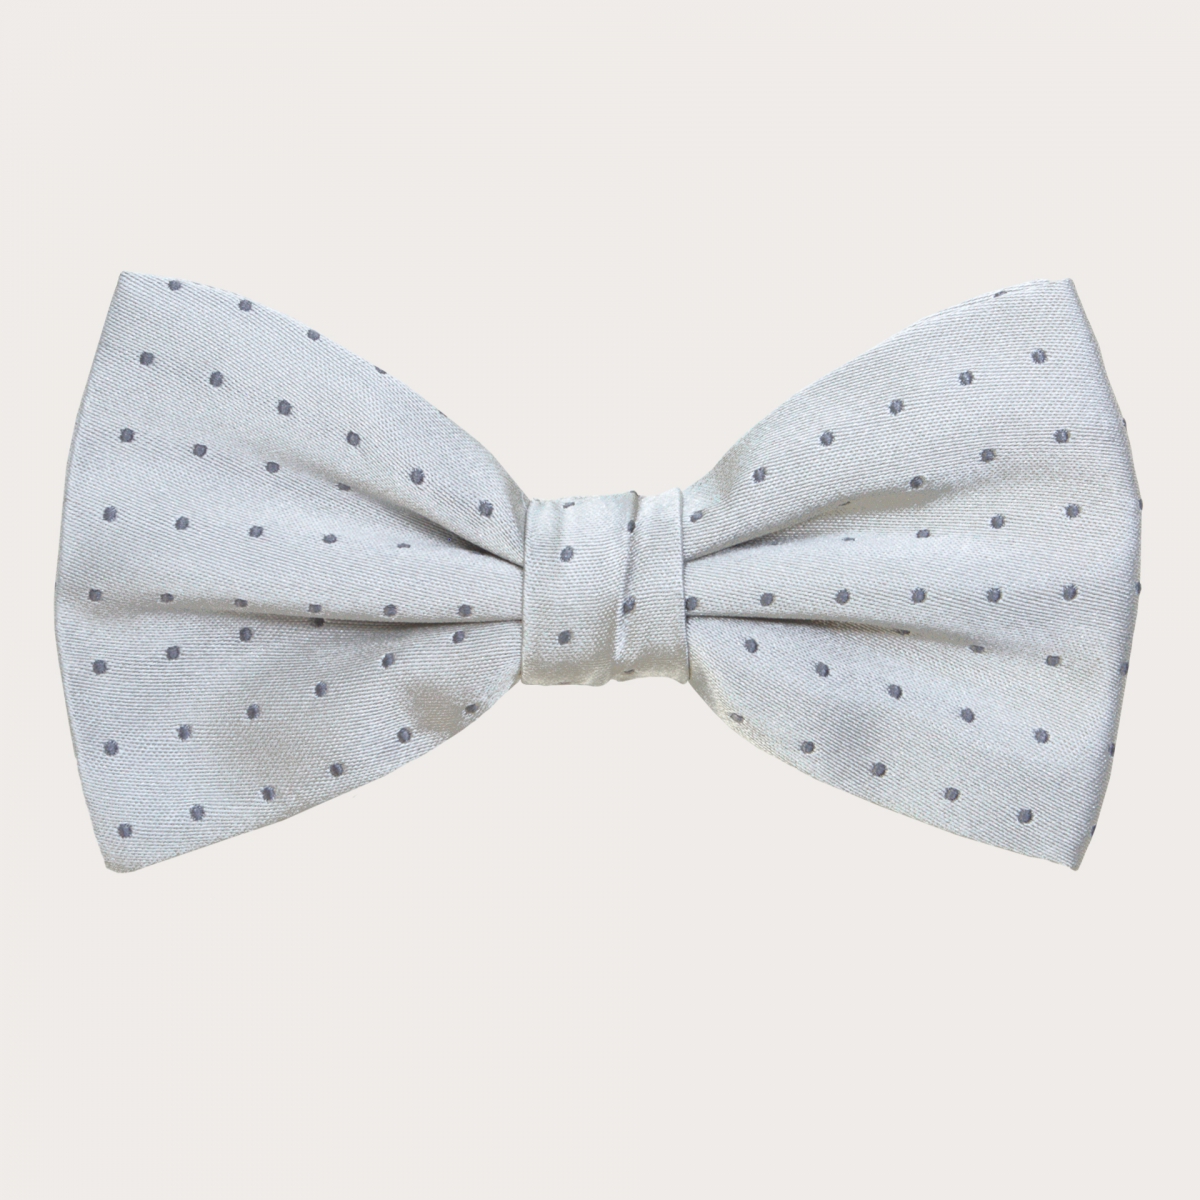 SILVER SILK BOW TIE WITH WHITE DOTS MOTIF 